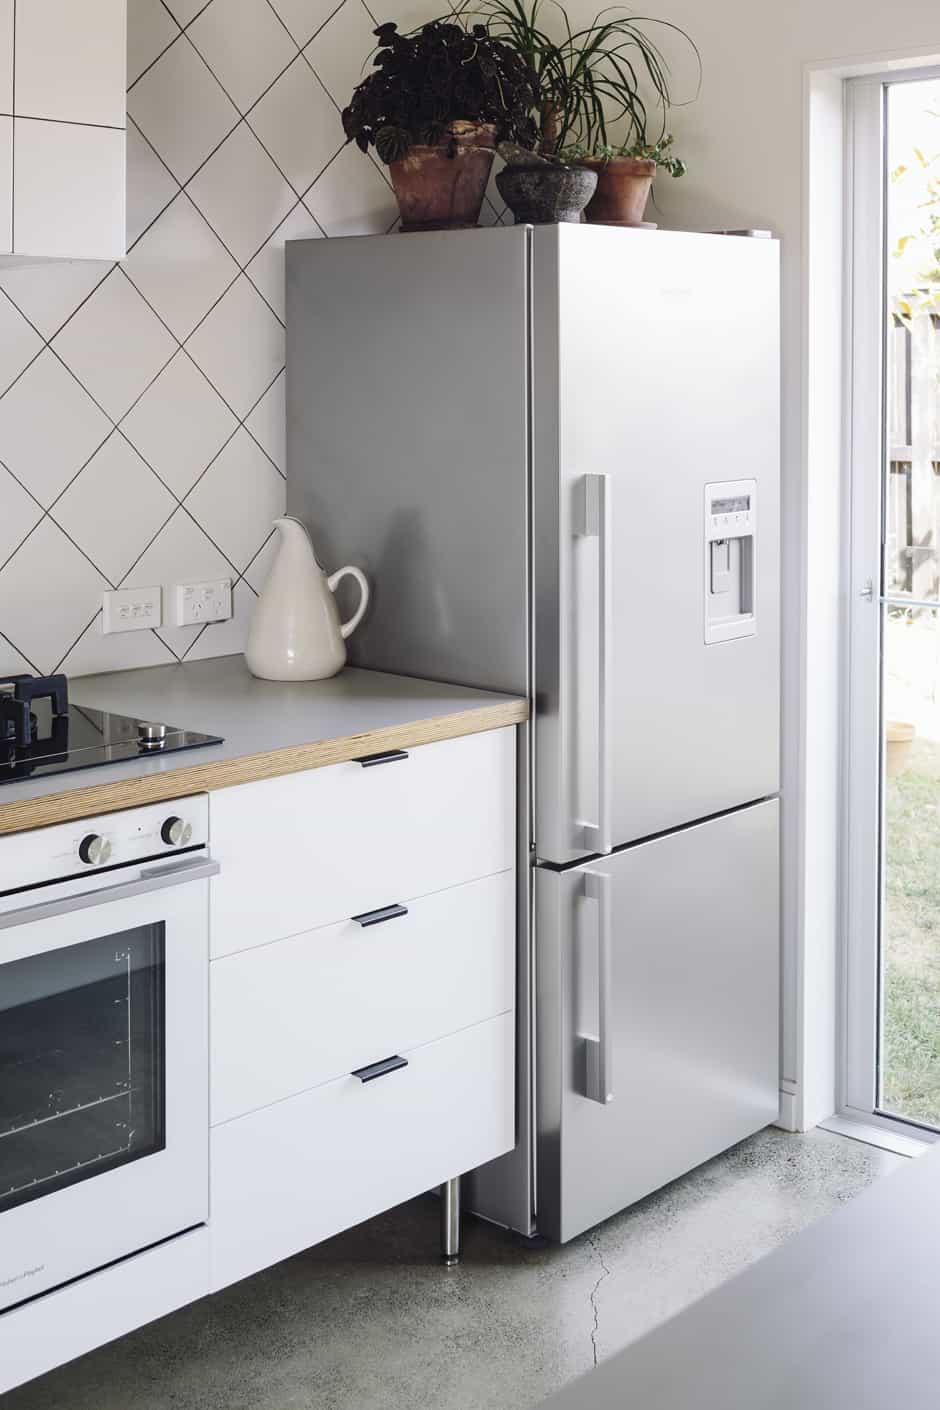 fisher-paykel-casestudy-homestyle-7